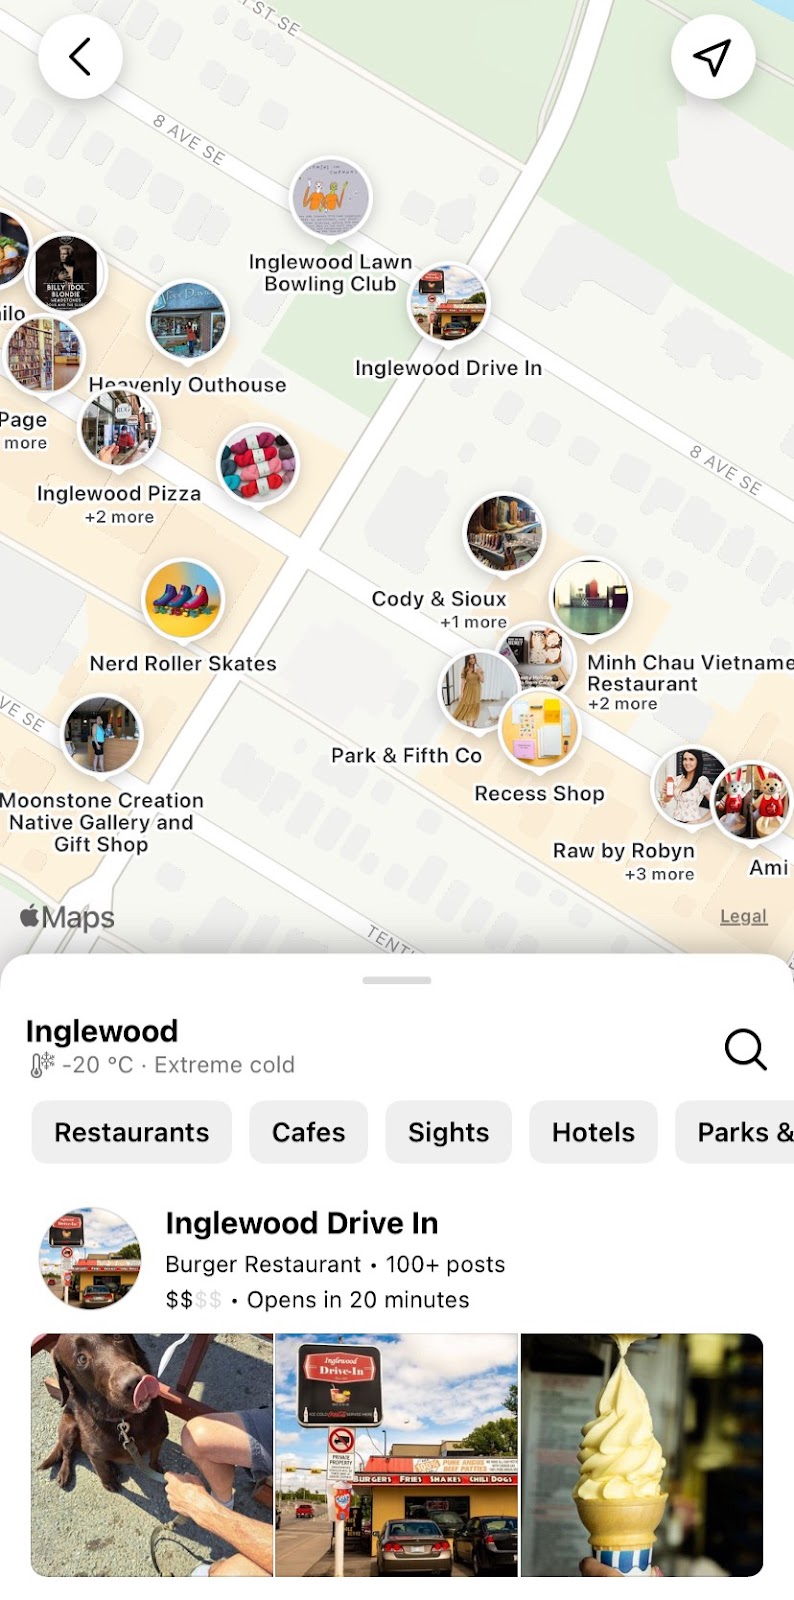 Inglewood Drive In restaurant opened in Instagram’s searchable map